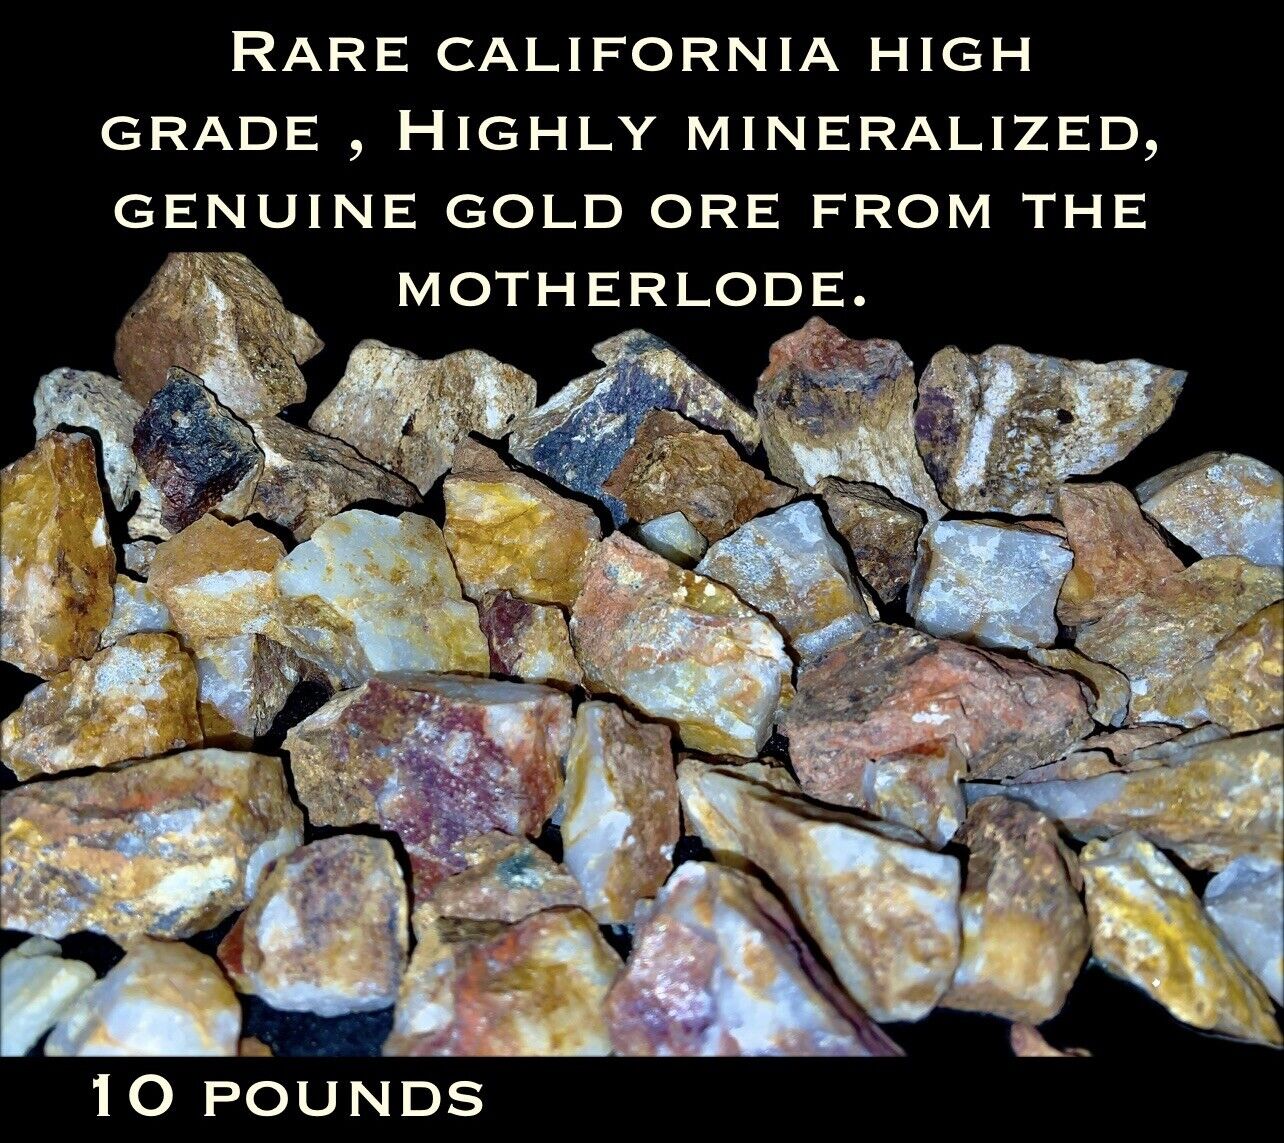 5LB HIGH GRADE HIGHLY MINERALIZED GOLD ORE W/VISIBLE GOLD FROM THE MOTHERLODE